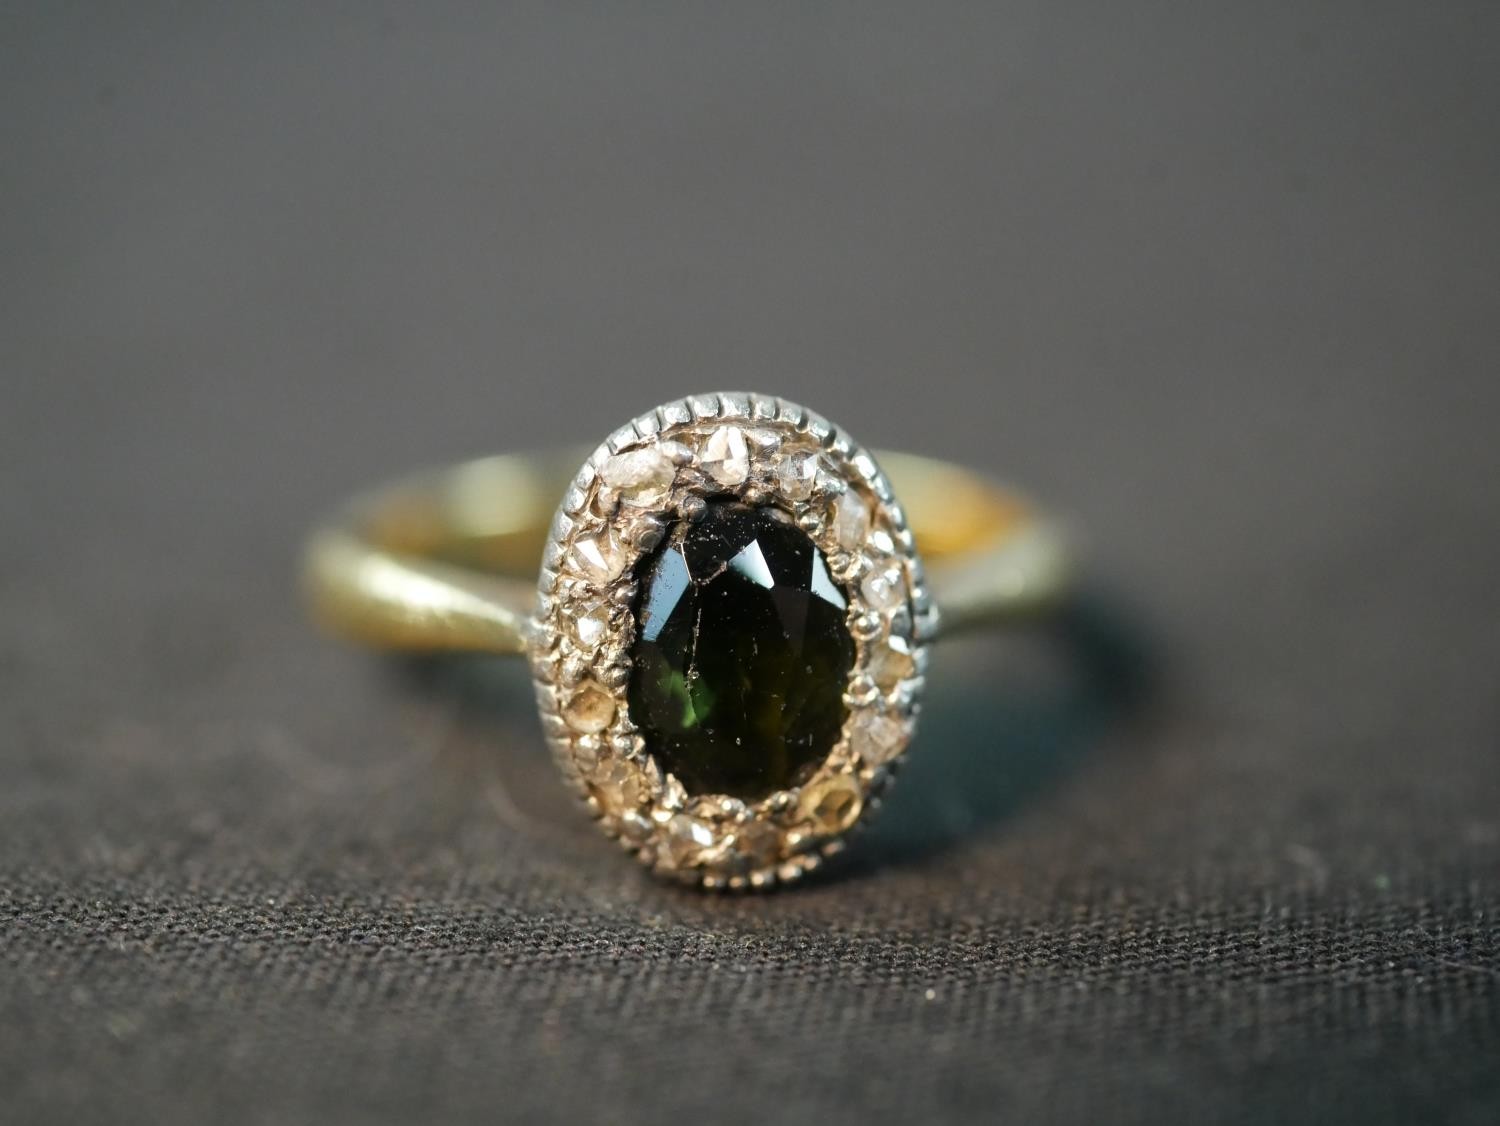 An early 20th century 18 carat closed back green stone oval cluster ring, set to centre with an oval